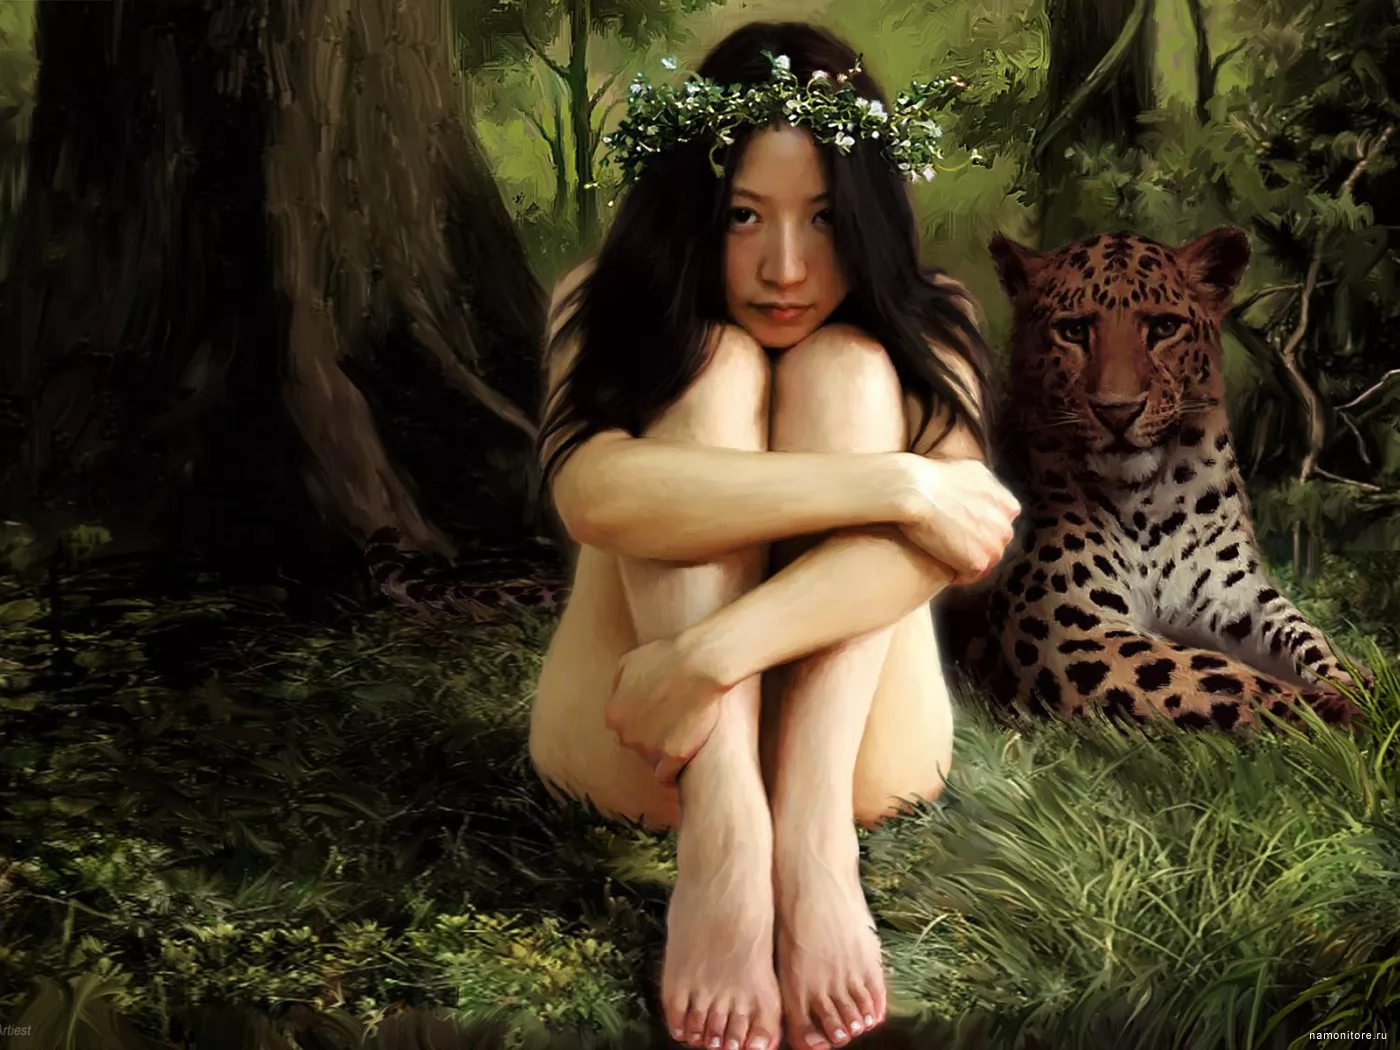 Girl and a leopard, cats, drawed, forest, girls, green, leopards x